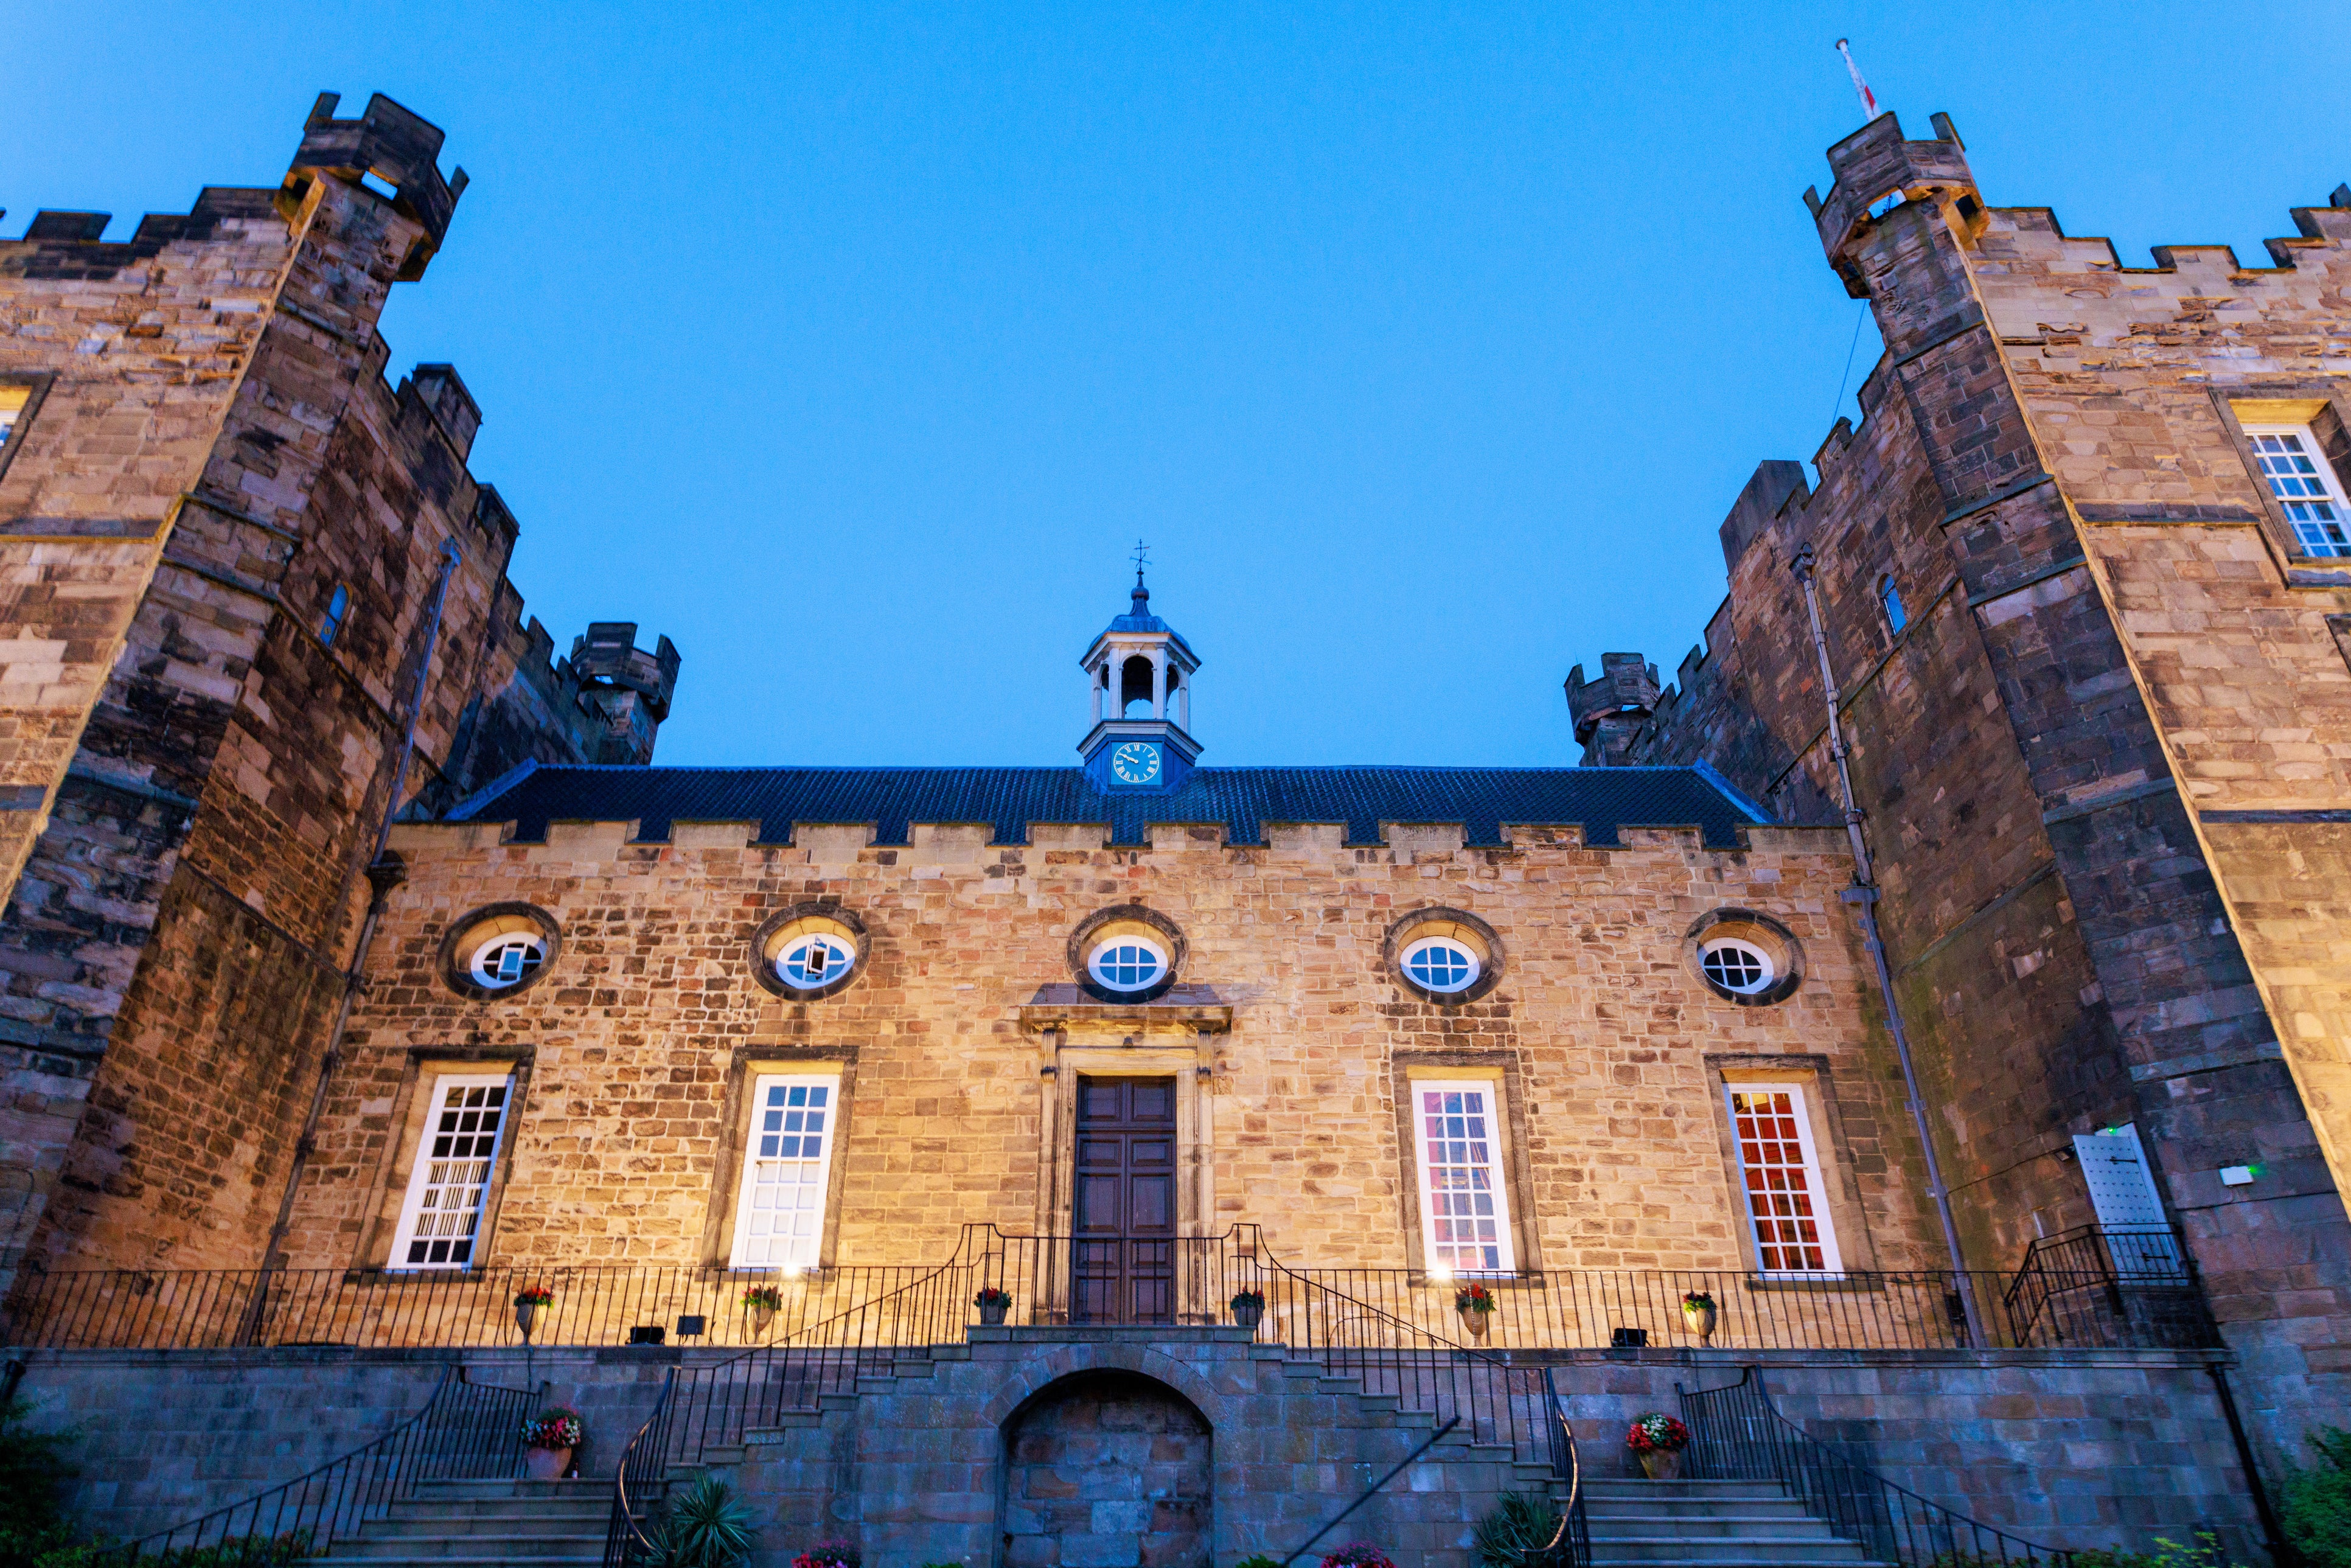 Faithfuls can live out their very own fairytale in Lumley Castle’s former chapel